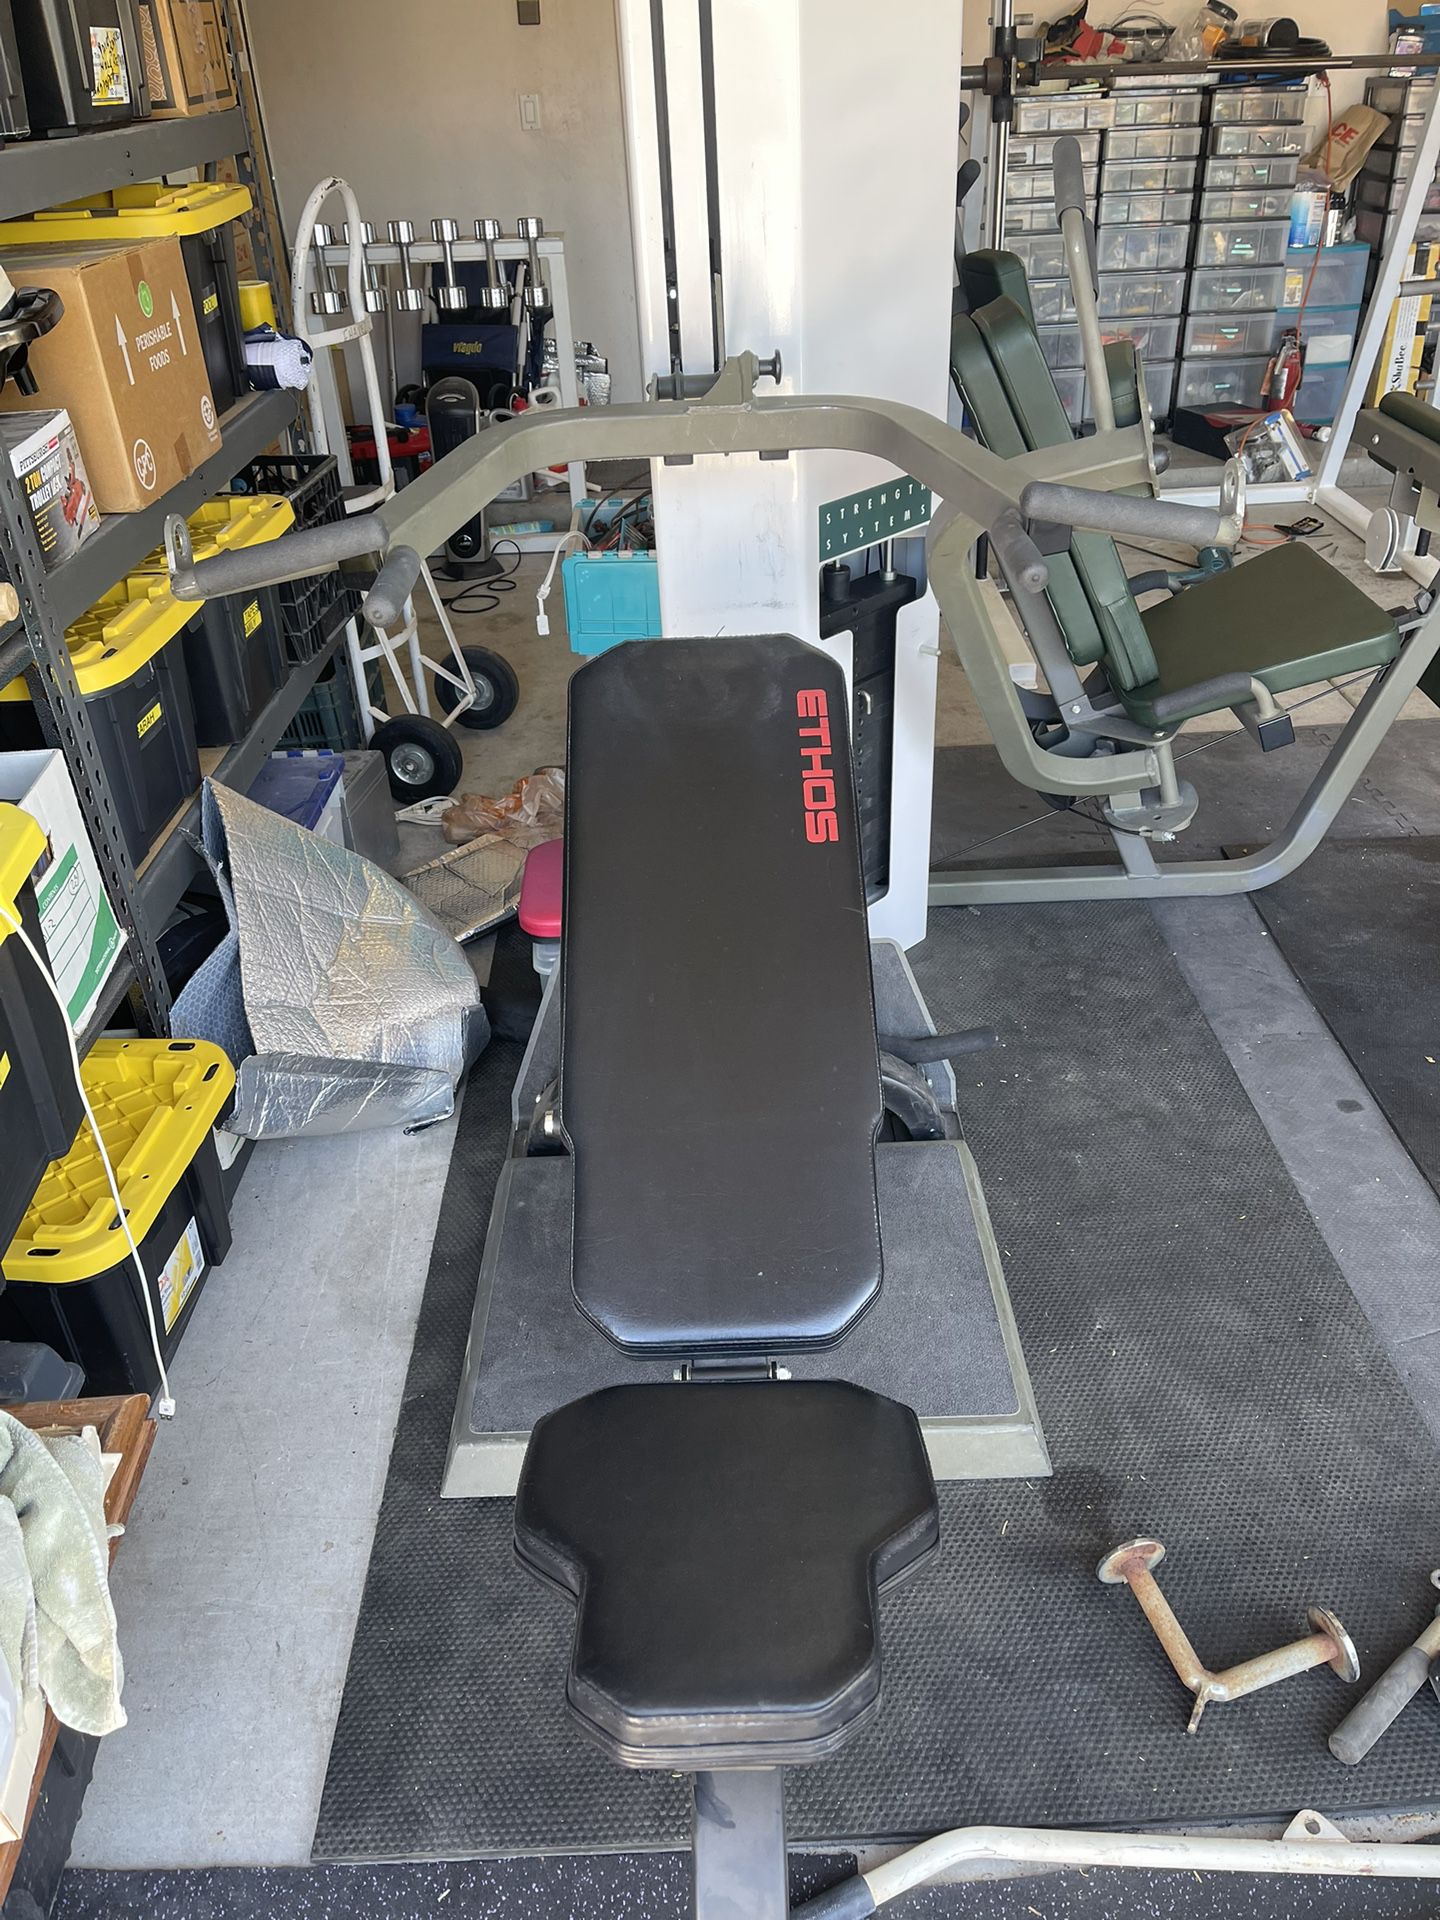 Cybex Personal Strength Systems